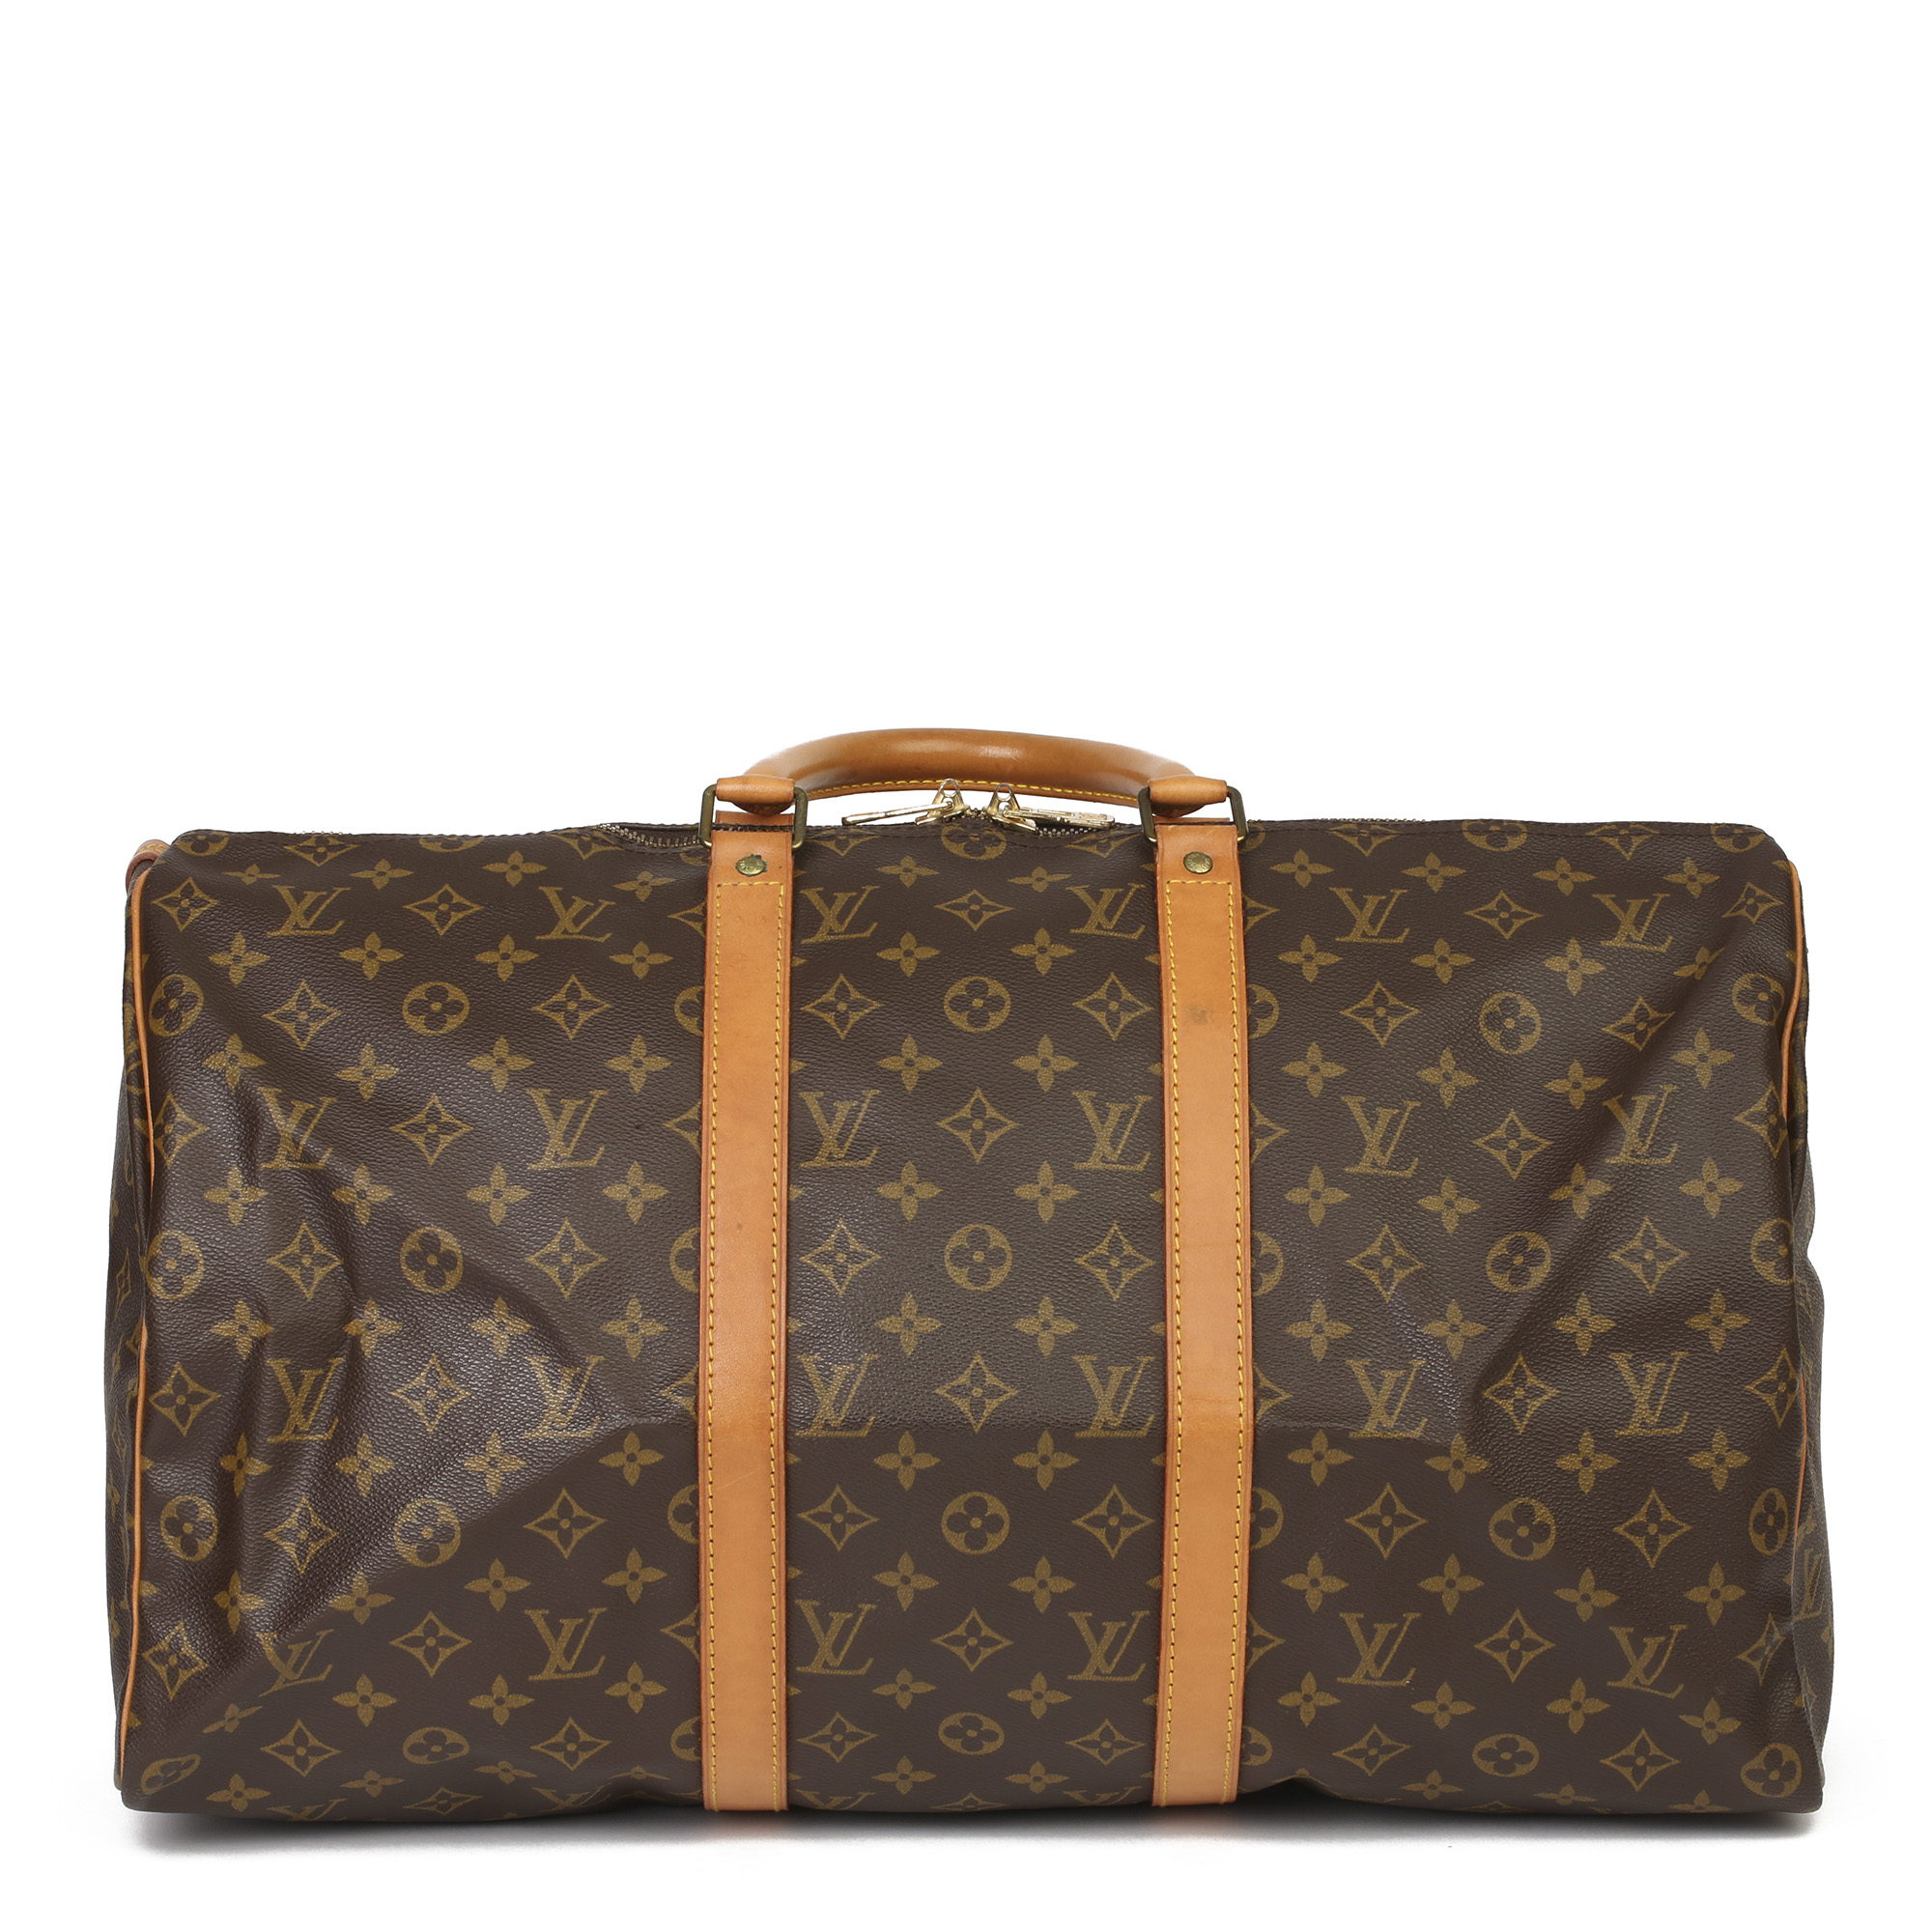 Louis Vuitton Brown Monogram Coated Canvas & Vachetta Leather Vintage Keepall 50 - Image 9 of 11